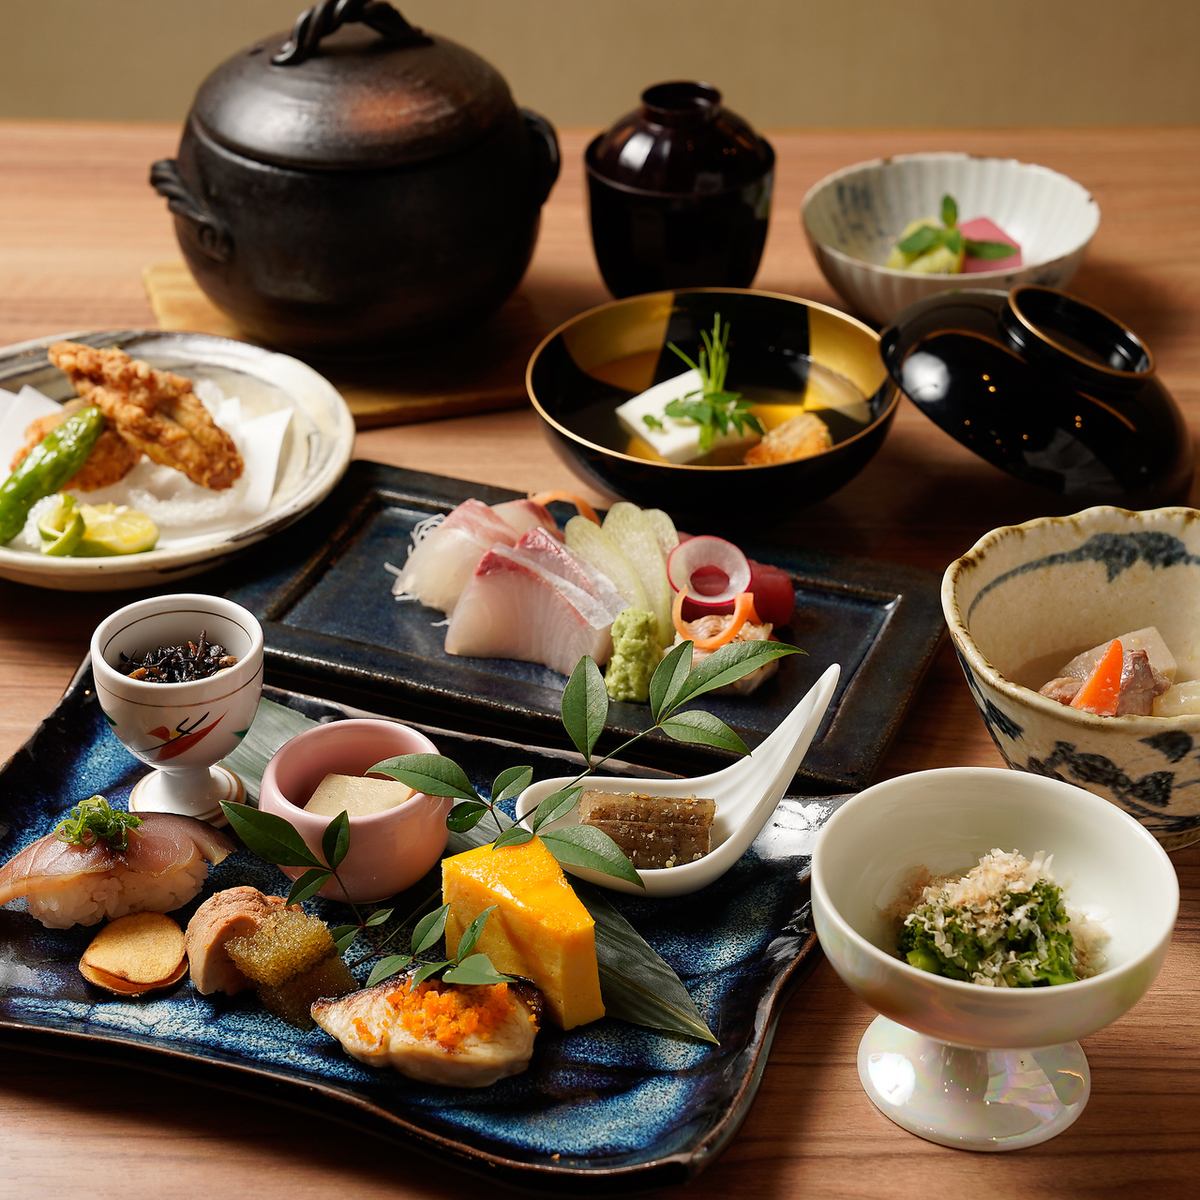 Located right next to JR Rokkomichi Station, this restaurant boasts fresh and delicious vegetables and fish.